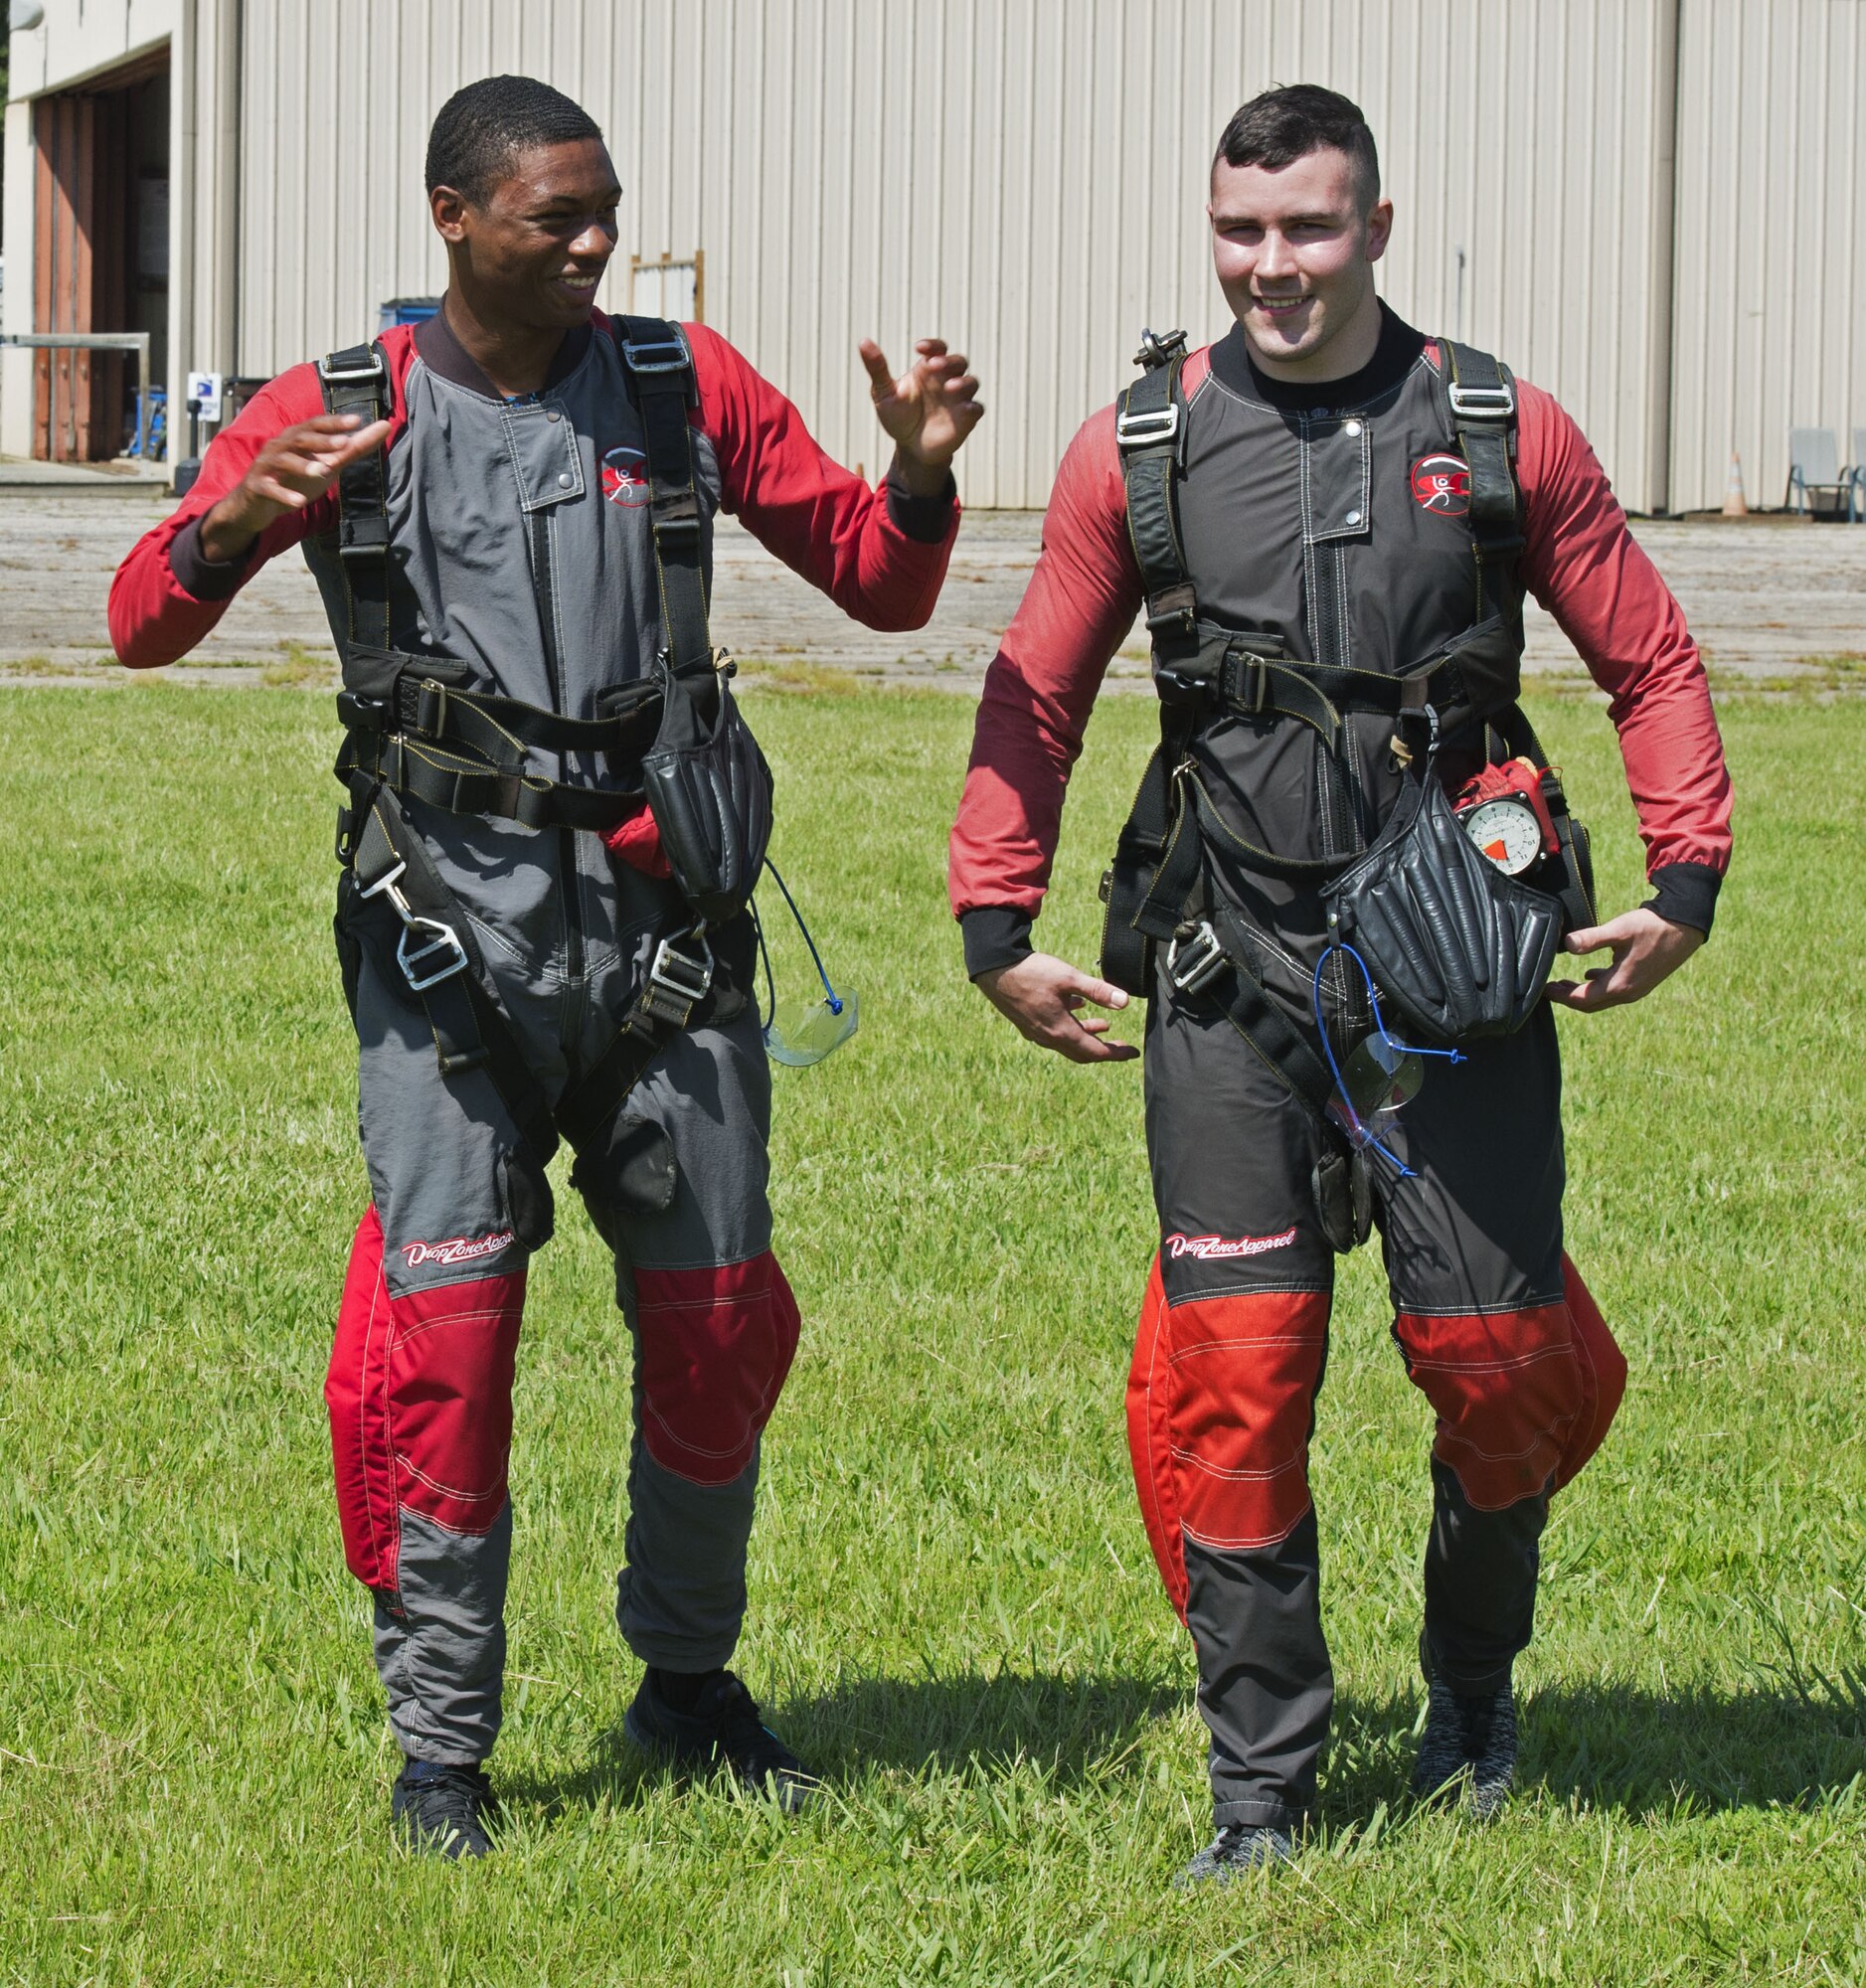 U.S. Air Force Airman 1st Class Gabriel Ford, left, and Airman 1st Class Tyler Sims, 20th Equipment Maintenance Squadron stock pile management crew chiefs, discuss their experiences following a “leap of faith” skydiving event in Chester, S.C., Aug. 11, 2018.